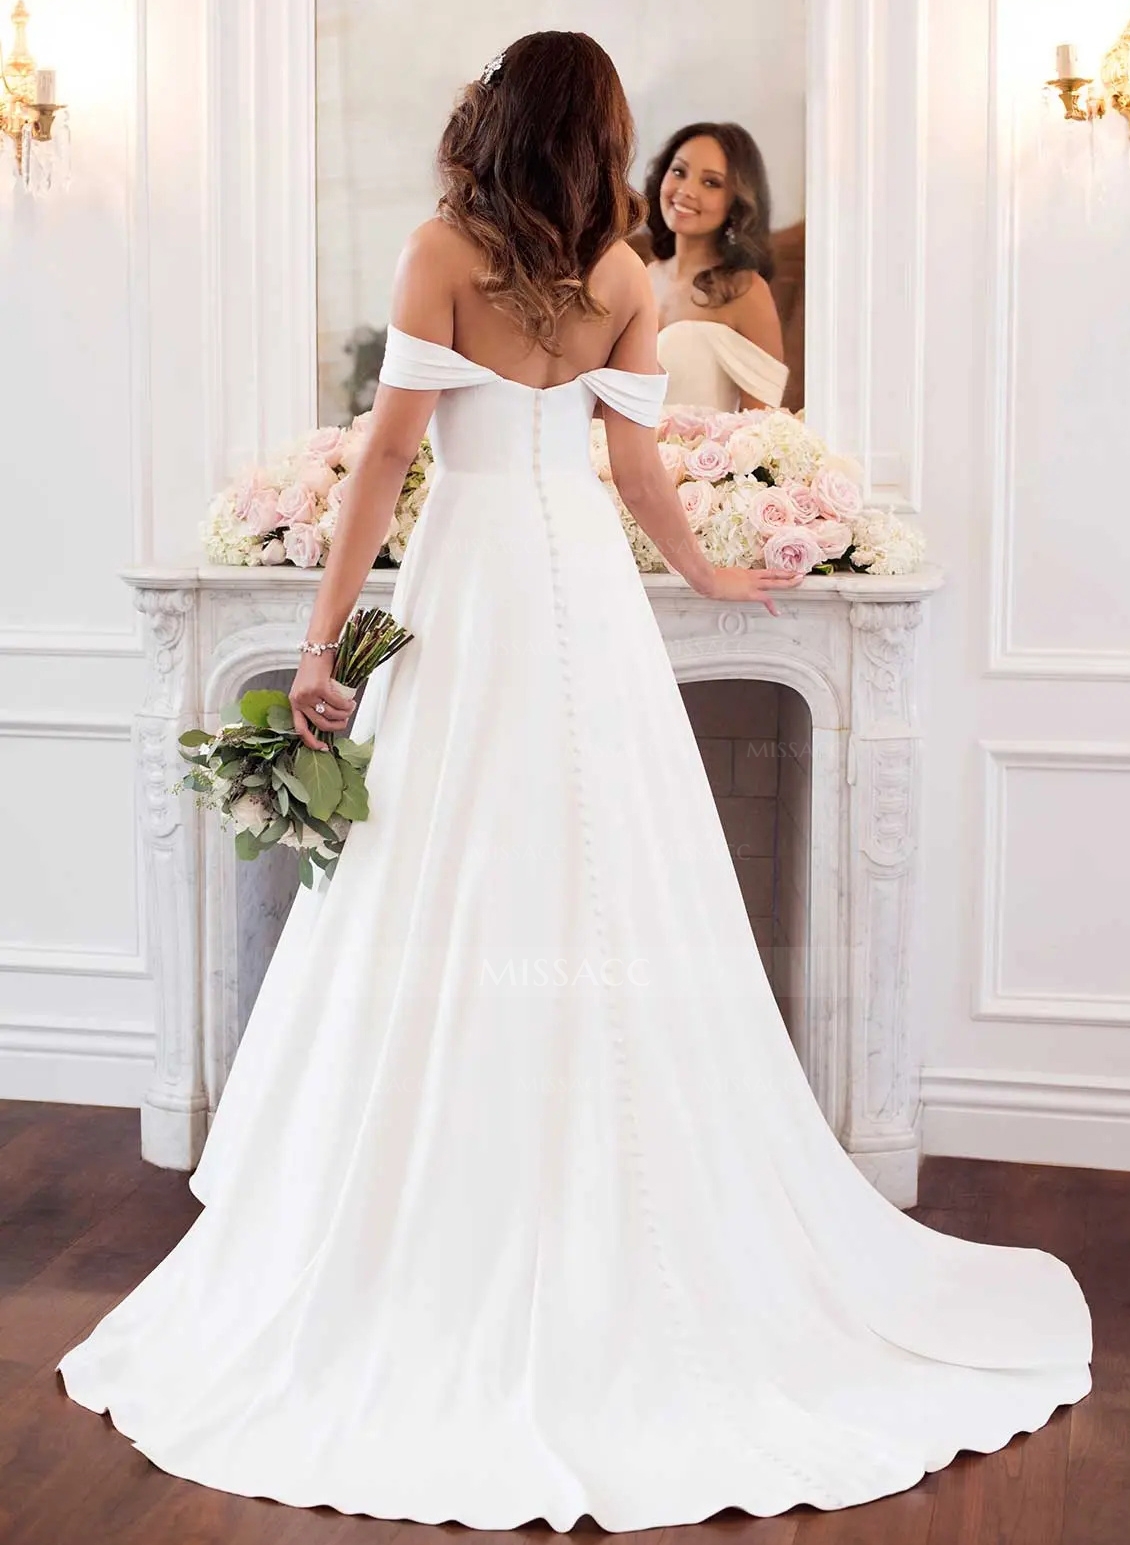 Ball-Gown Off-the-Shoulder Wedding Dresses With Satin 